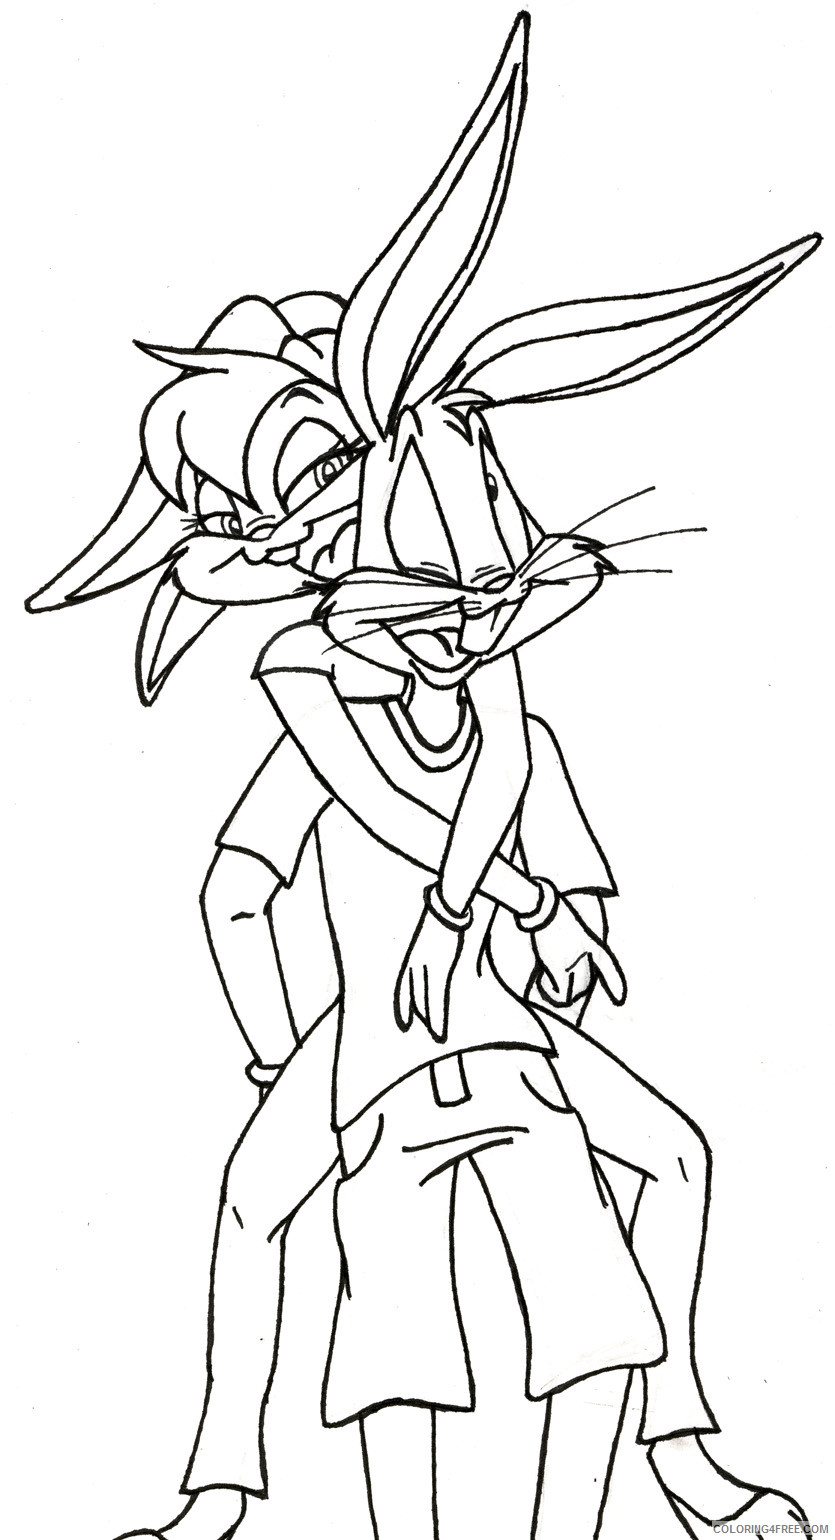 Bugs Bunny Coloring Pages Cartoons Bugs Bunny To Print 2 Printable 2020 1419 Coloring4free